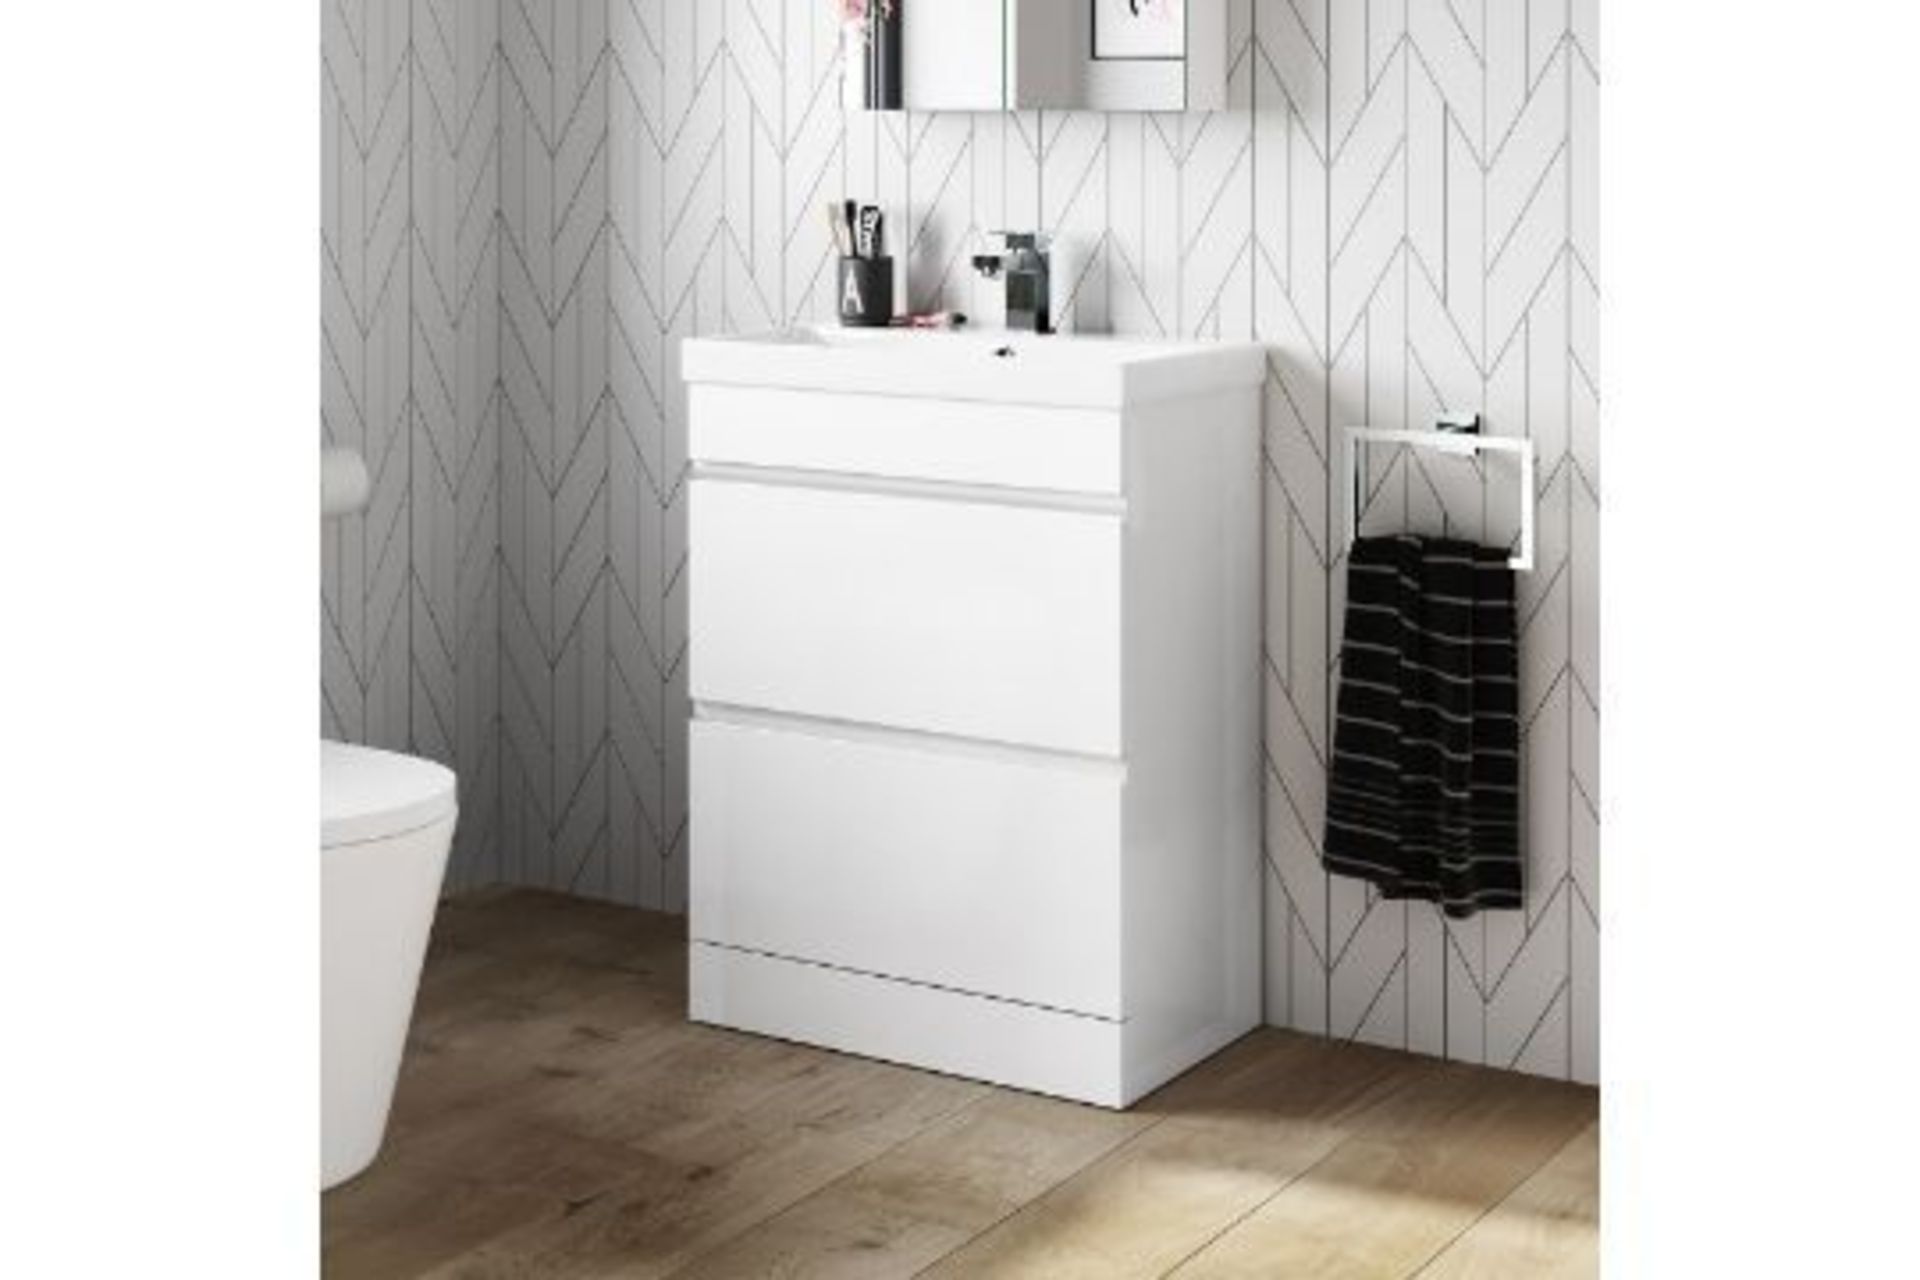 New Boxed 600mm Trent Gloss White Sink Cabinet - Floor Standing.RRP £499.99.Comes Complete With